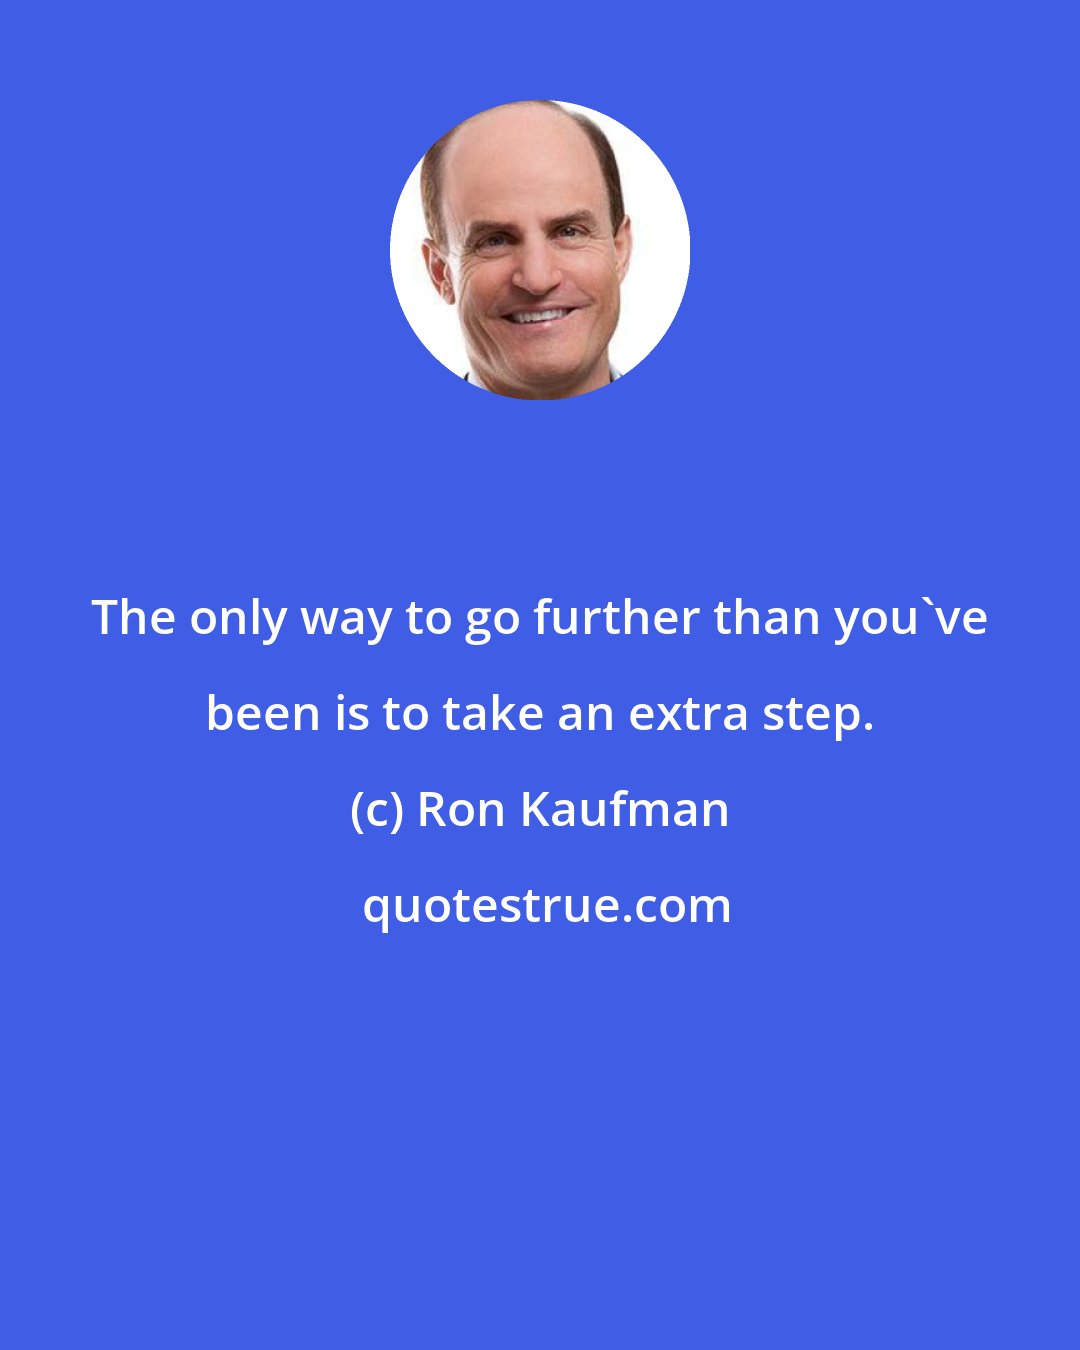 Ron Kaufman: The only way to go further than you've been is to take an extra step.